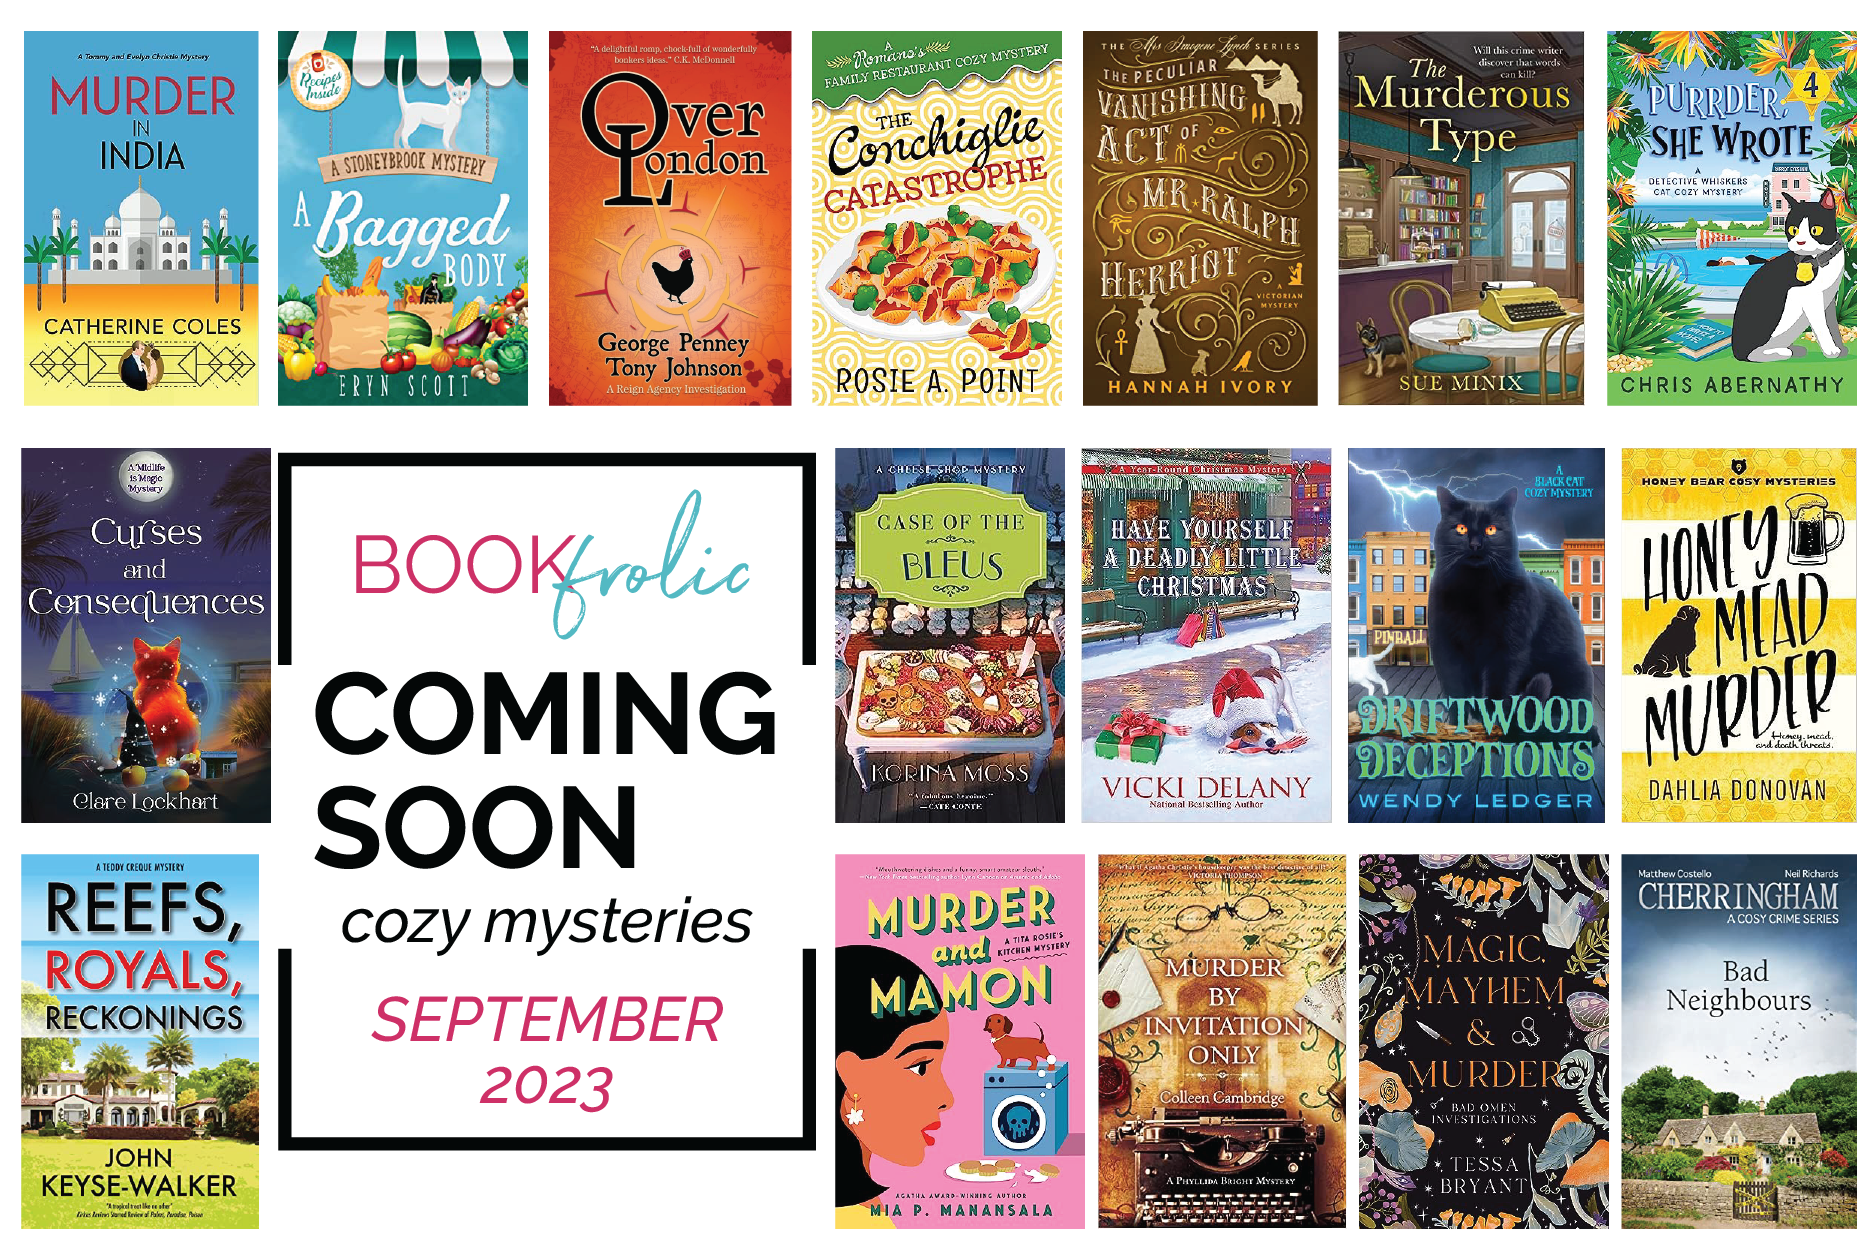 New release cozy mysteries for September 2023